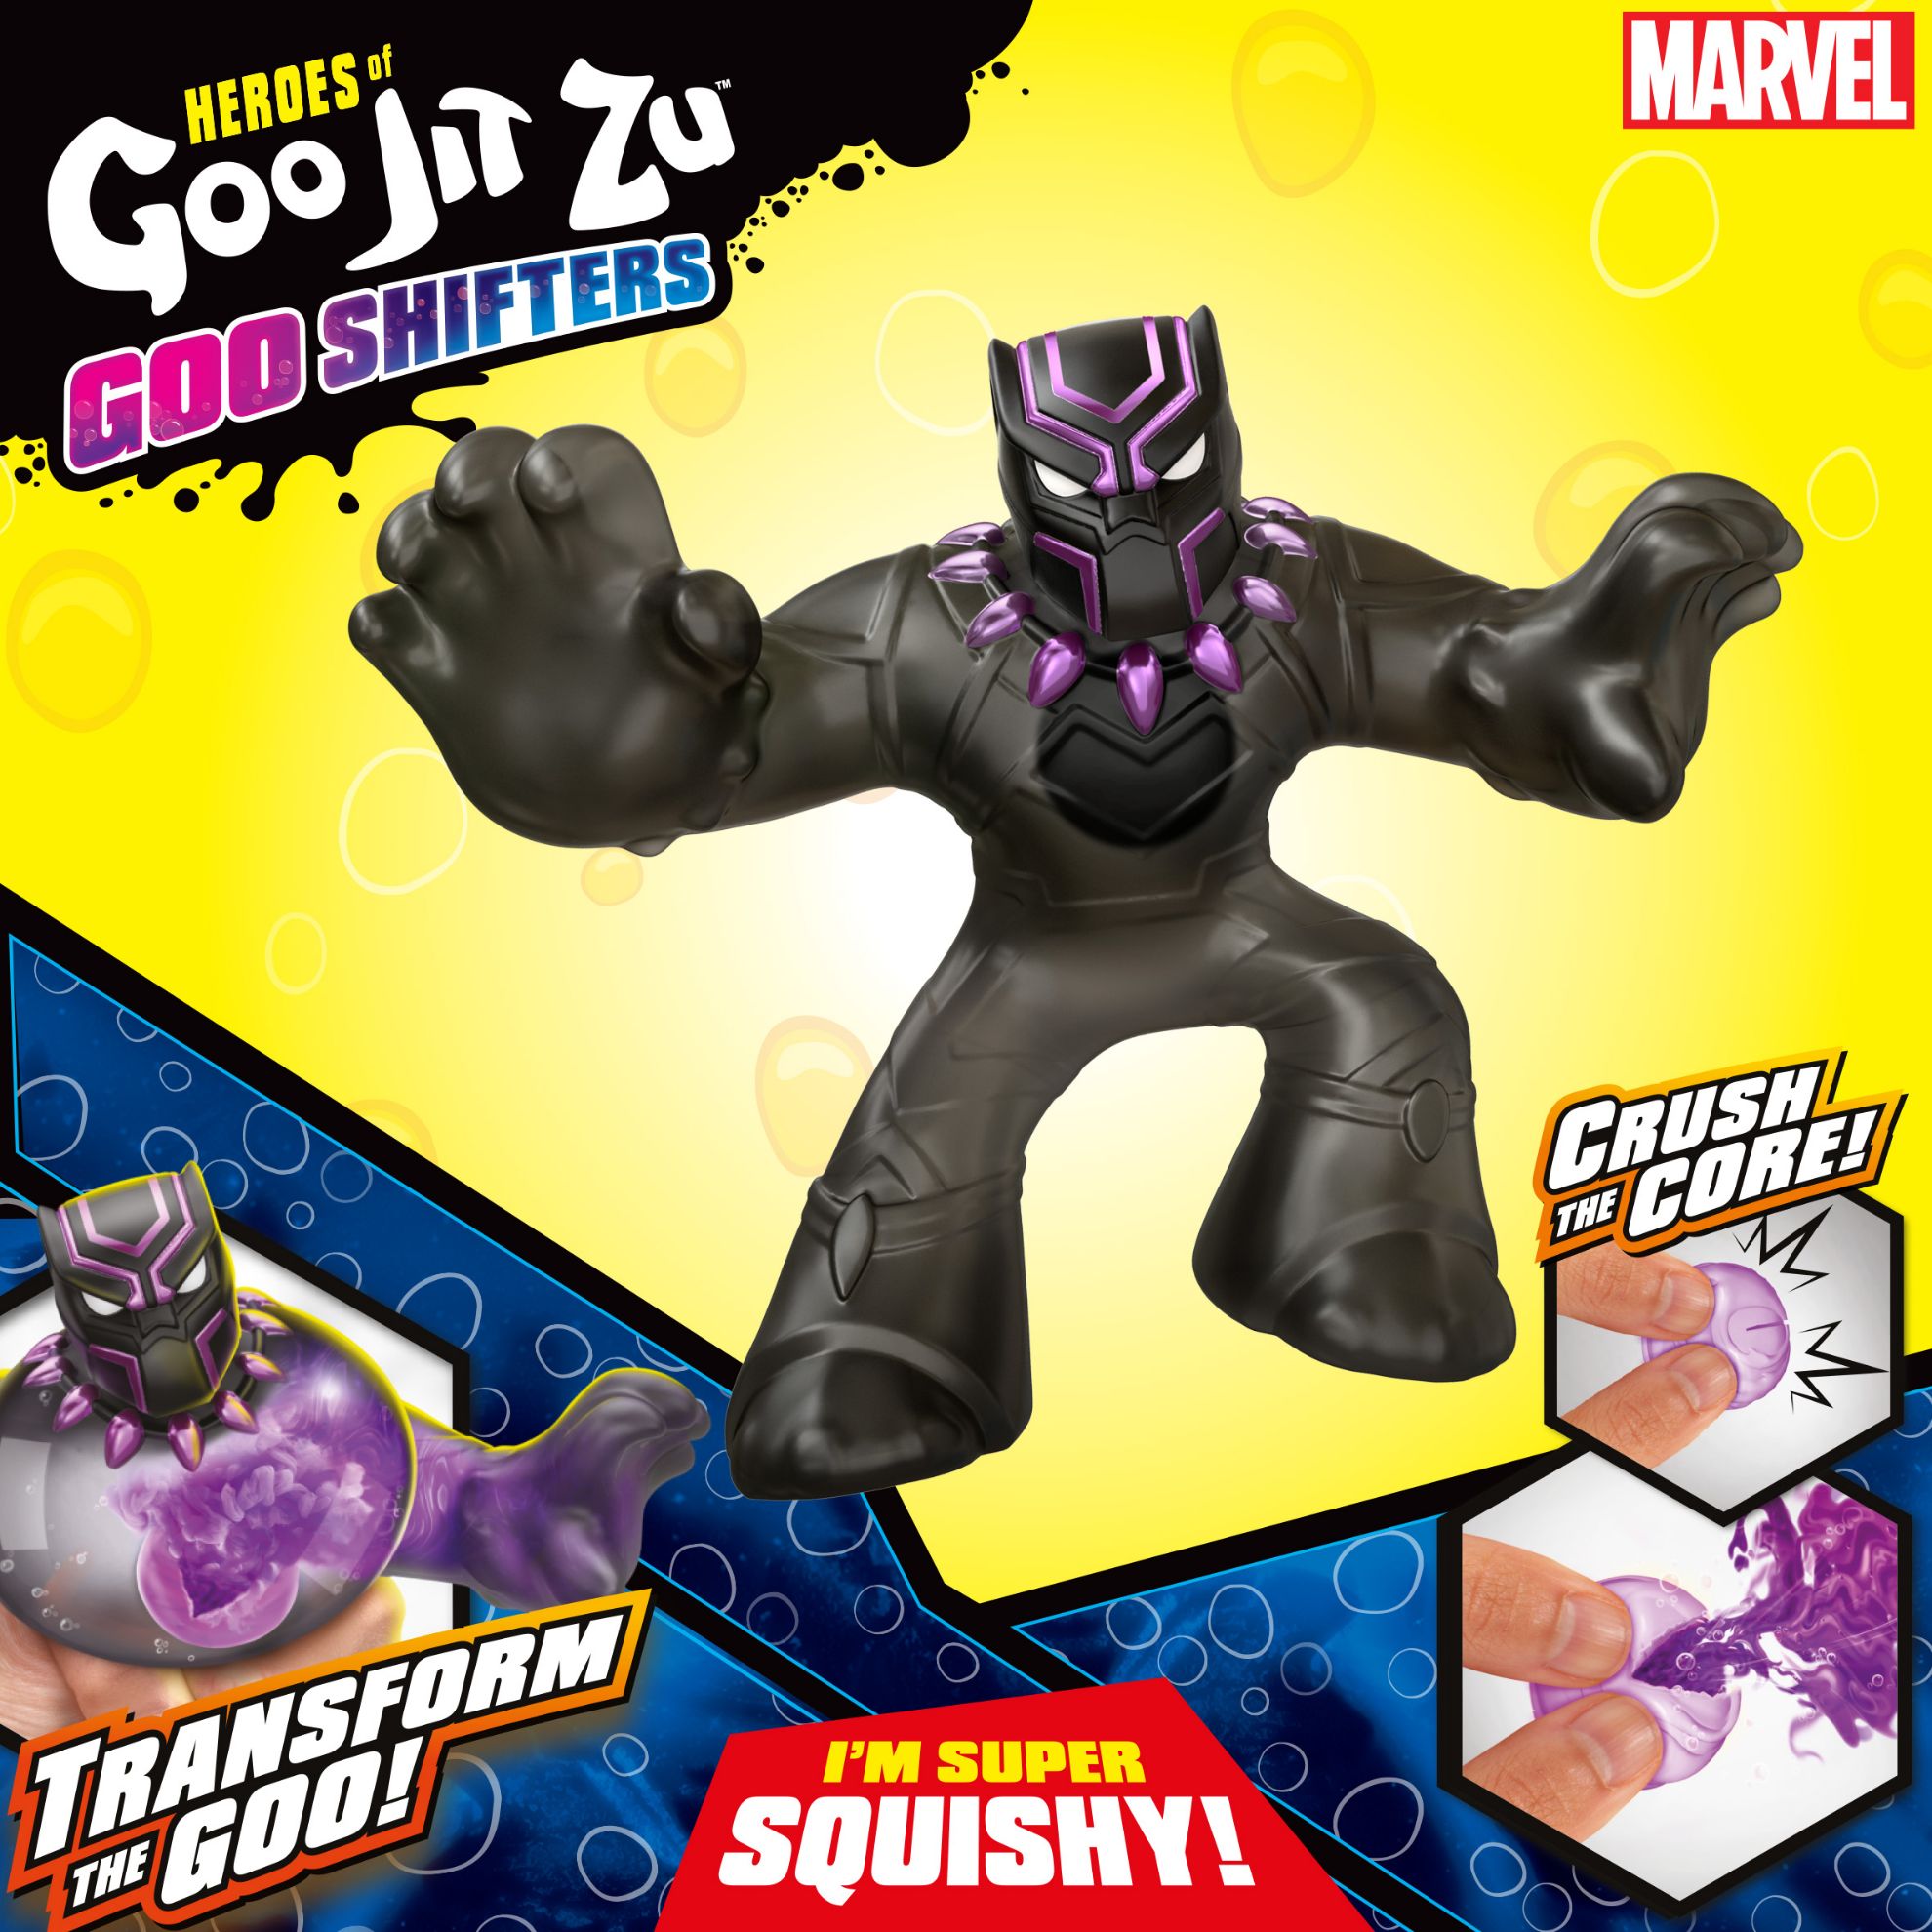 Picture of Heroes of Goo Jit Zu Marvel Goo Shifters-Black Panther